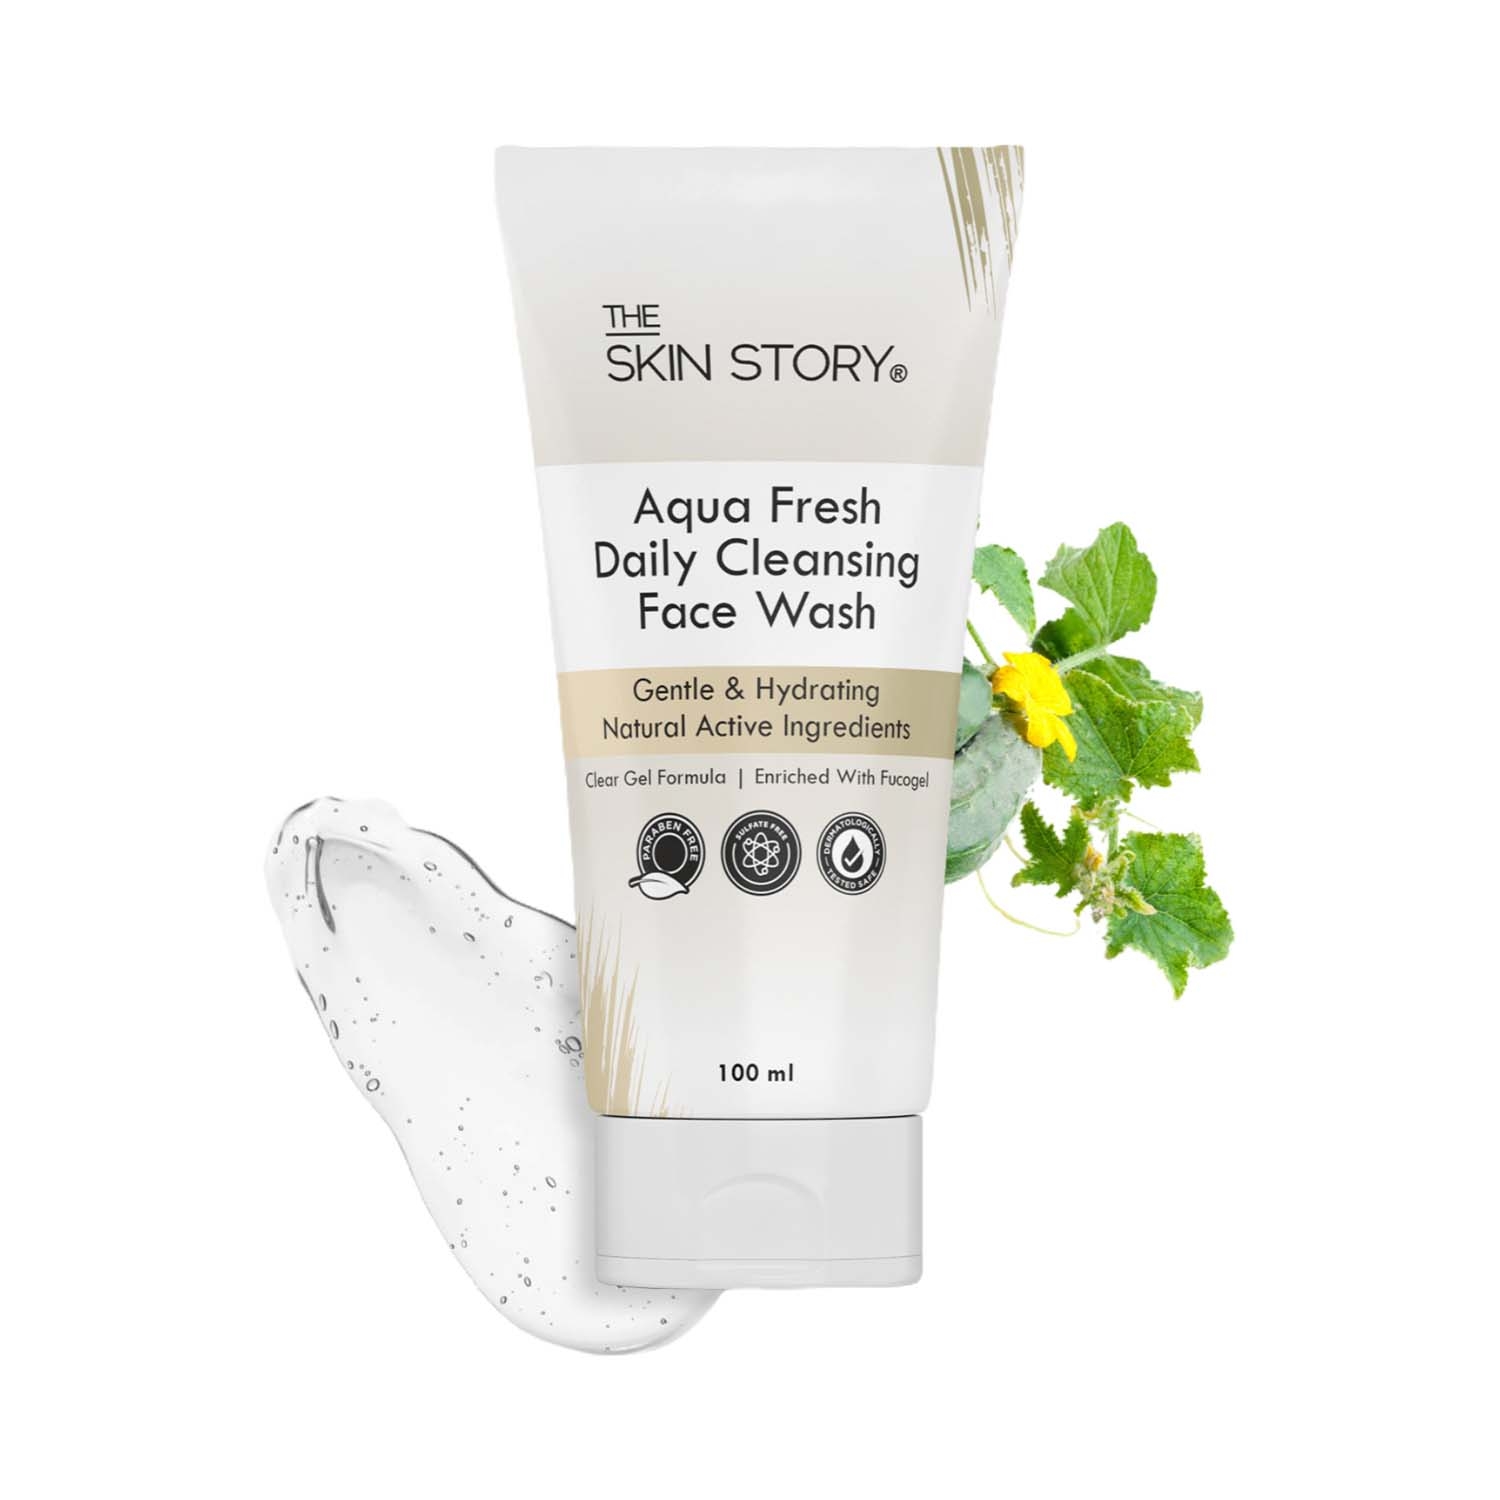 The Skin Story | The Skin Story Aqua Fresh Daily Cleansing Face Wash (100ml)